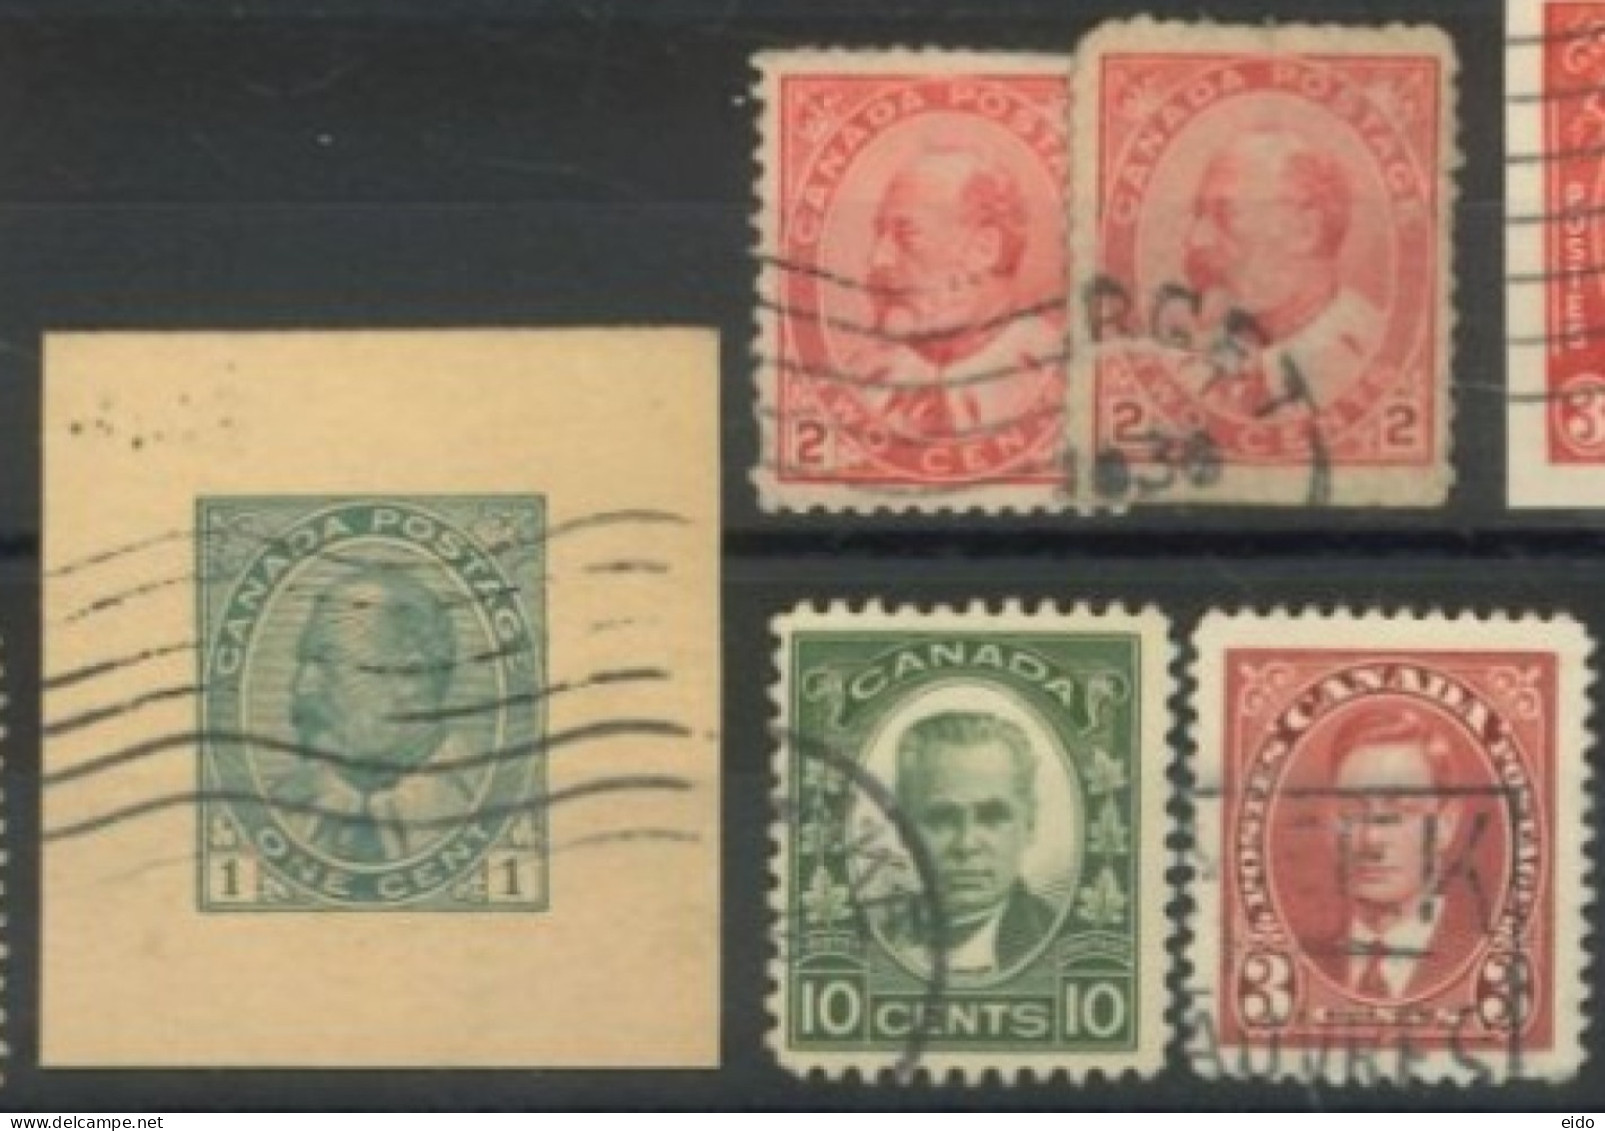 CANADA - 1903/37, KING EDWARD VII, & KING GEORGE V STAMPS SET OF 5, USED. - Used Stamps